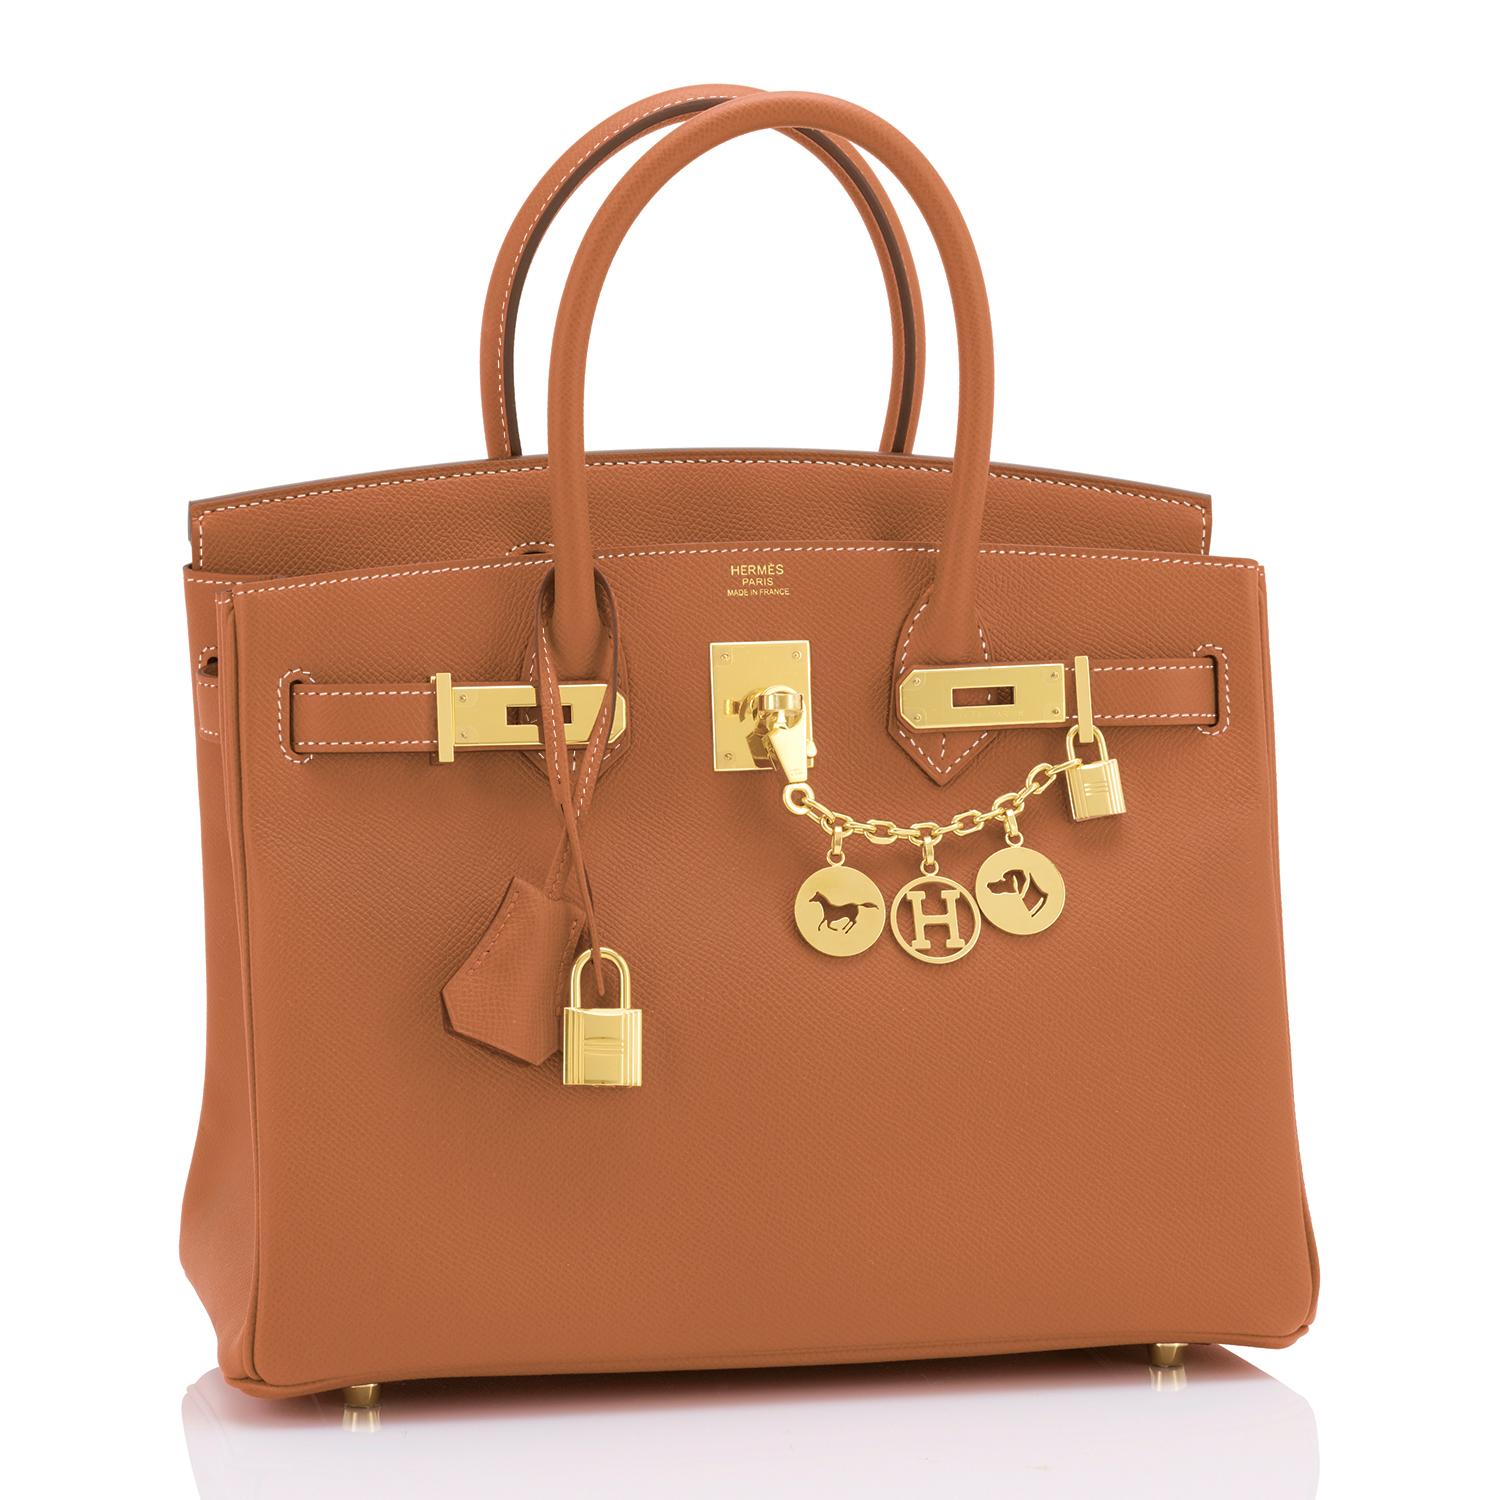 Hermes Gold Camel Tan 30cm Birkin Gold Hardware NEW Store Fresh
Brand New in Box. Store Fresh. Pristine Condition (with plastic on hardware). 
Perfect gift! Comes with lock, keys, clochette, sleeper, raincoat, and Hermes box.
Gold is a gorgeous